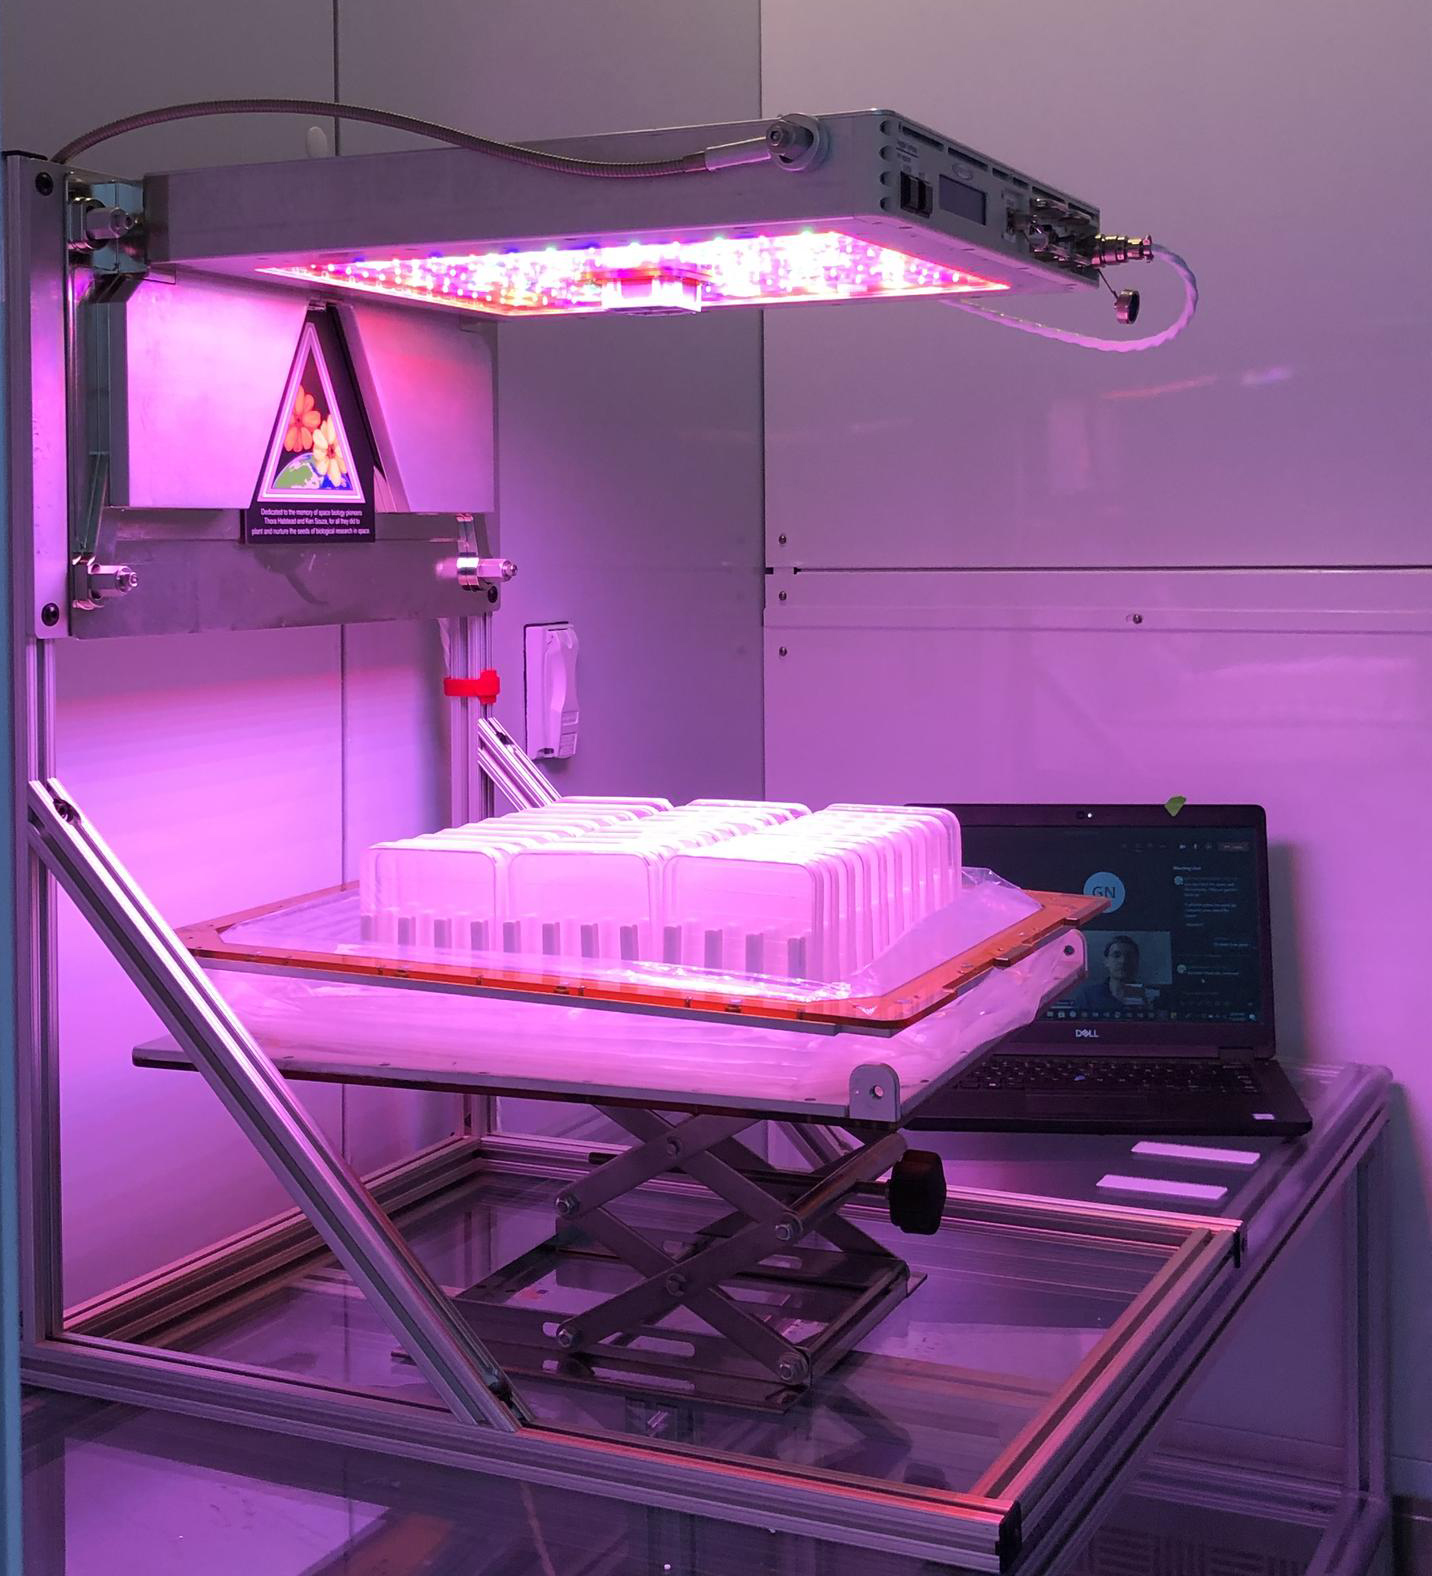 The Science Verification Test for NASA’s Advanced Plant Experiment-08 (APEX-08) takes place inside the Veggie growth chamber at NASA’s Kennedy Space Center in Florida on Nov. 6, 2020. 